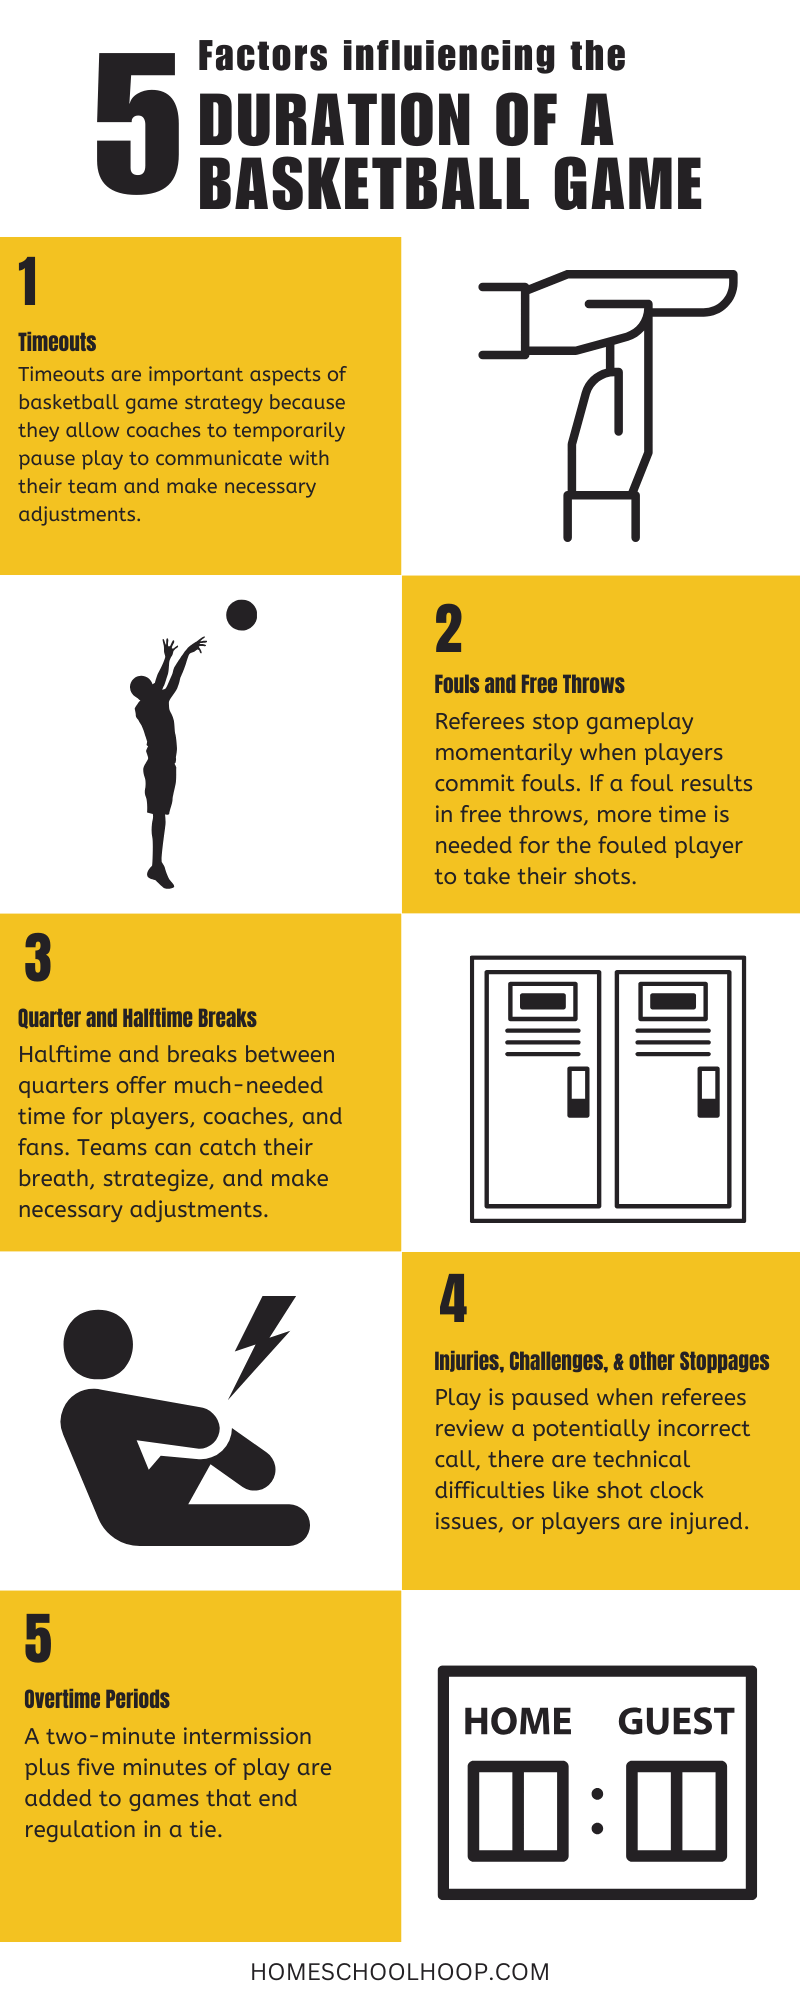 Infographic showing the 5 main factors influencing the duration of a basketball game.